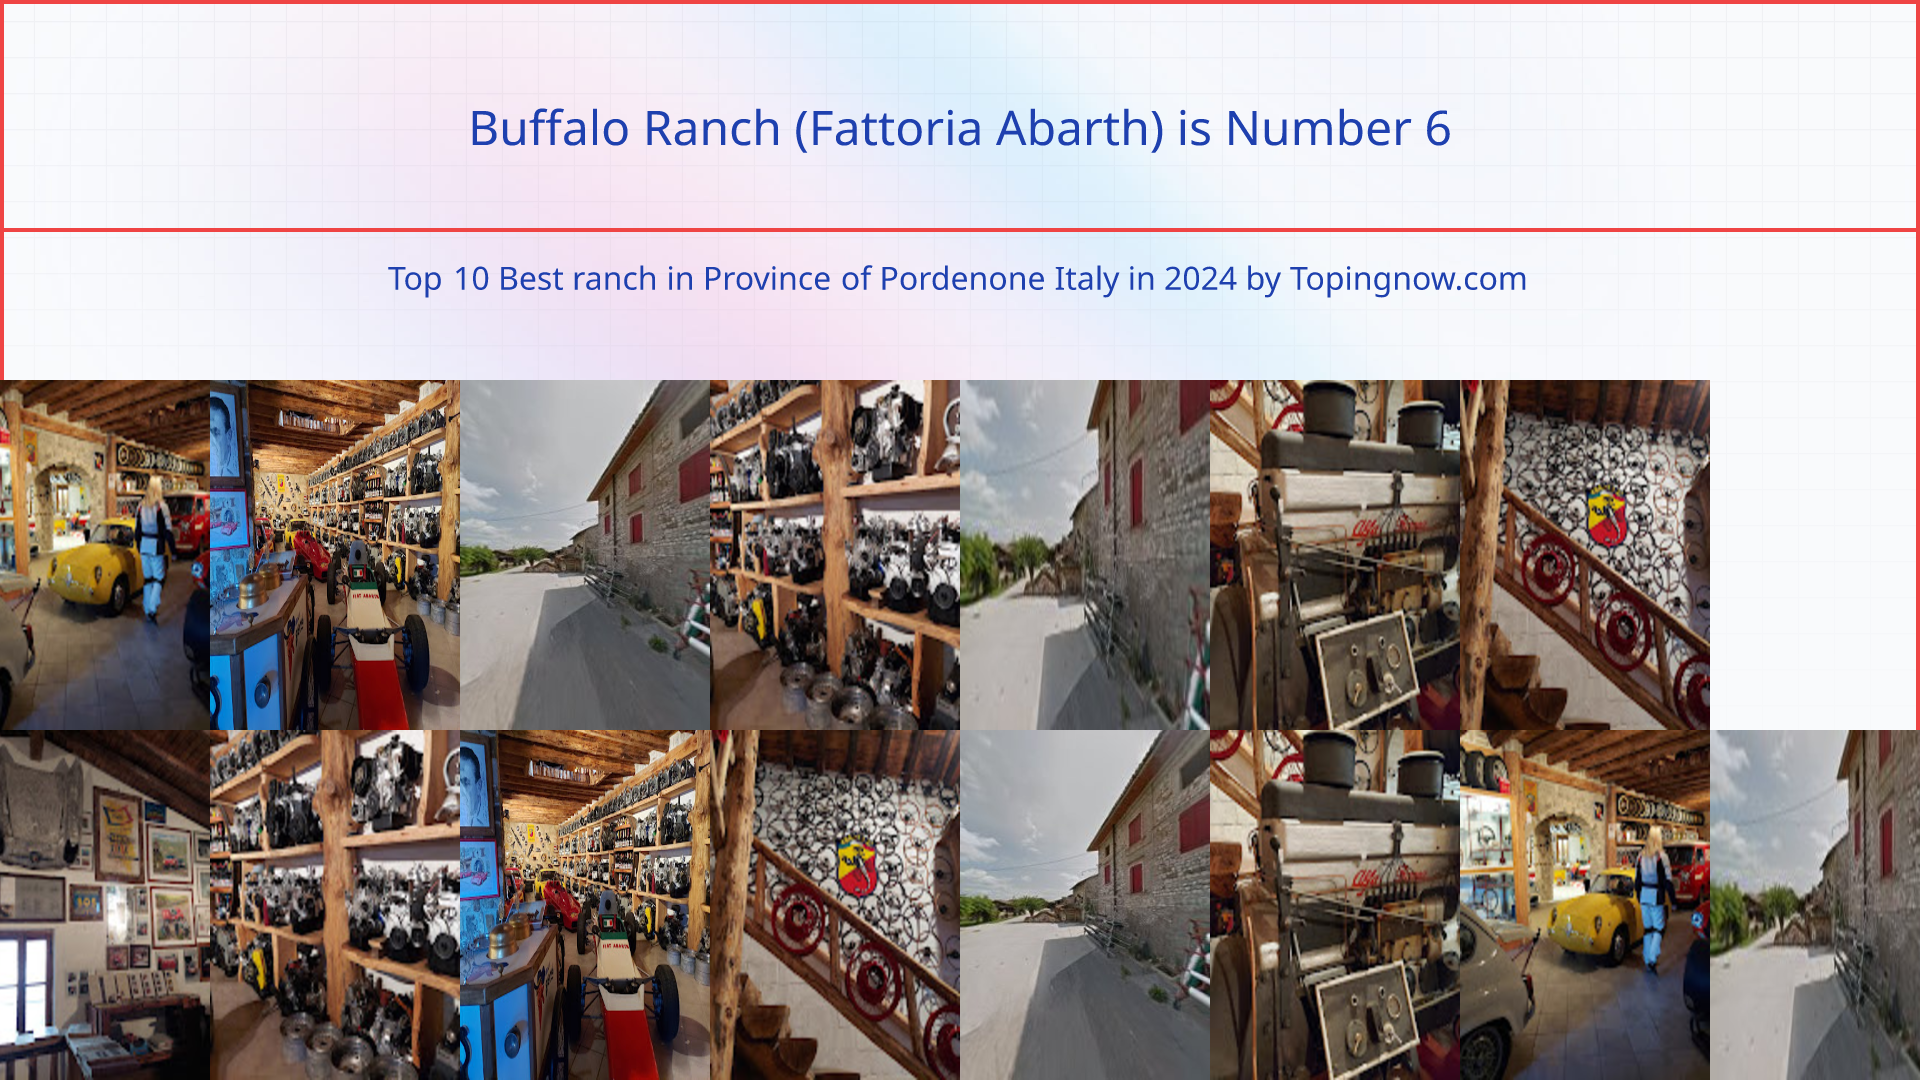 Buffalo Ranch (Fattoria Abarth): Top 10 Best ranch in Province of Pordenone Italy in 2024